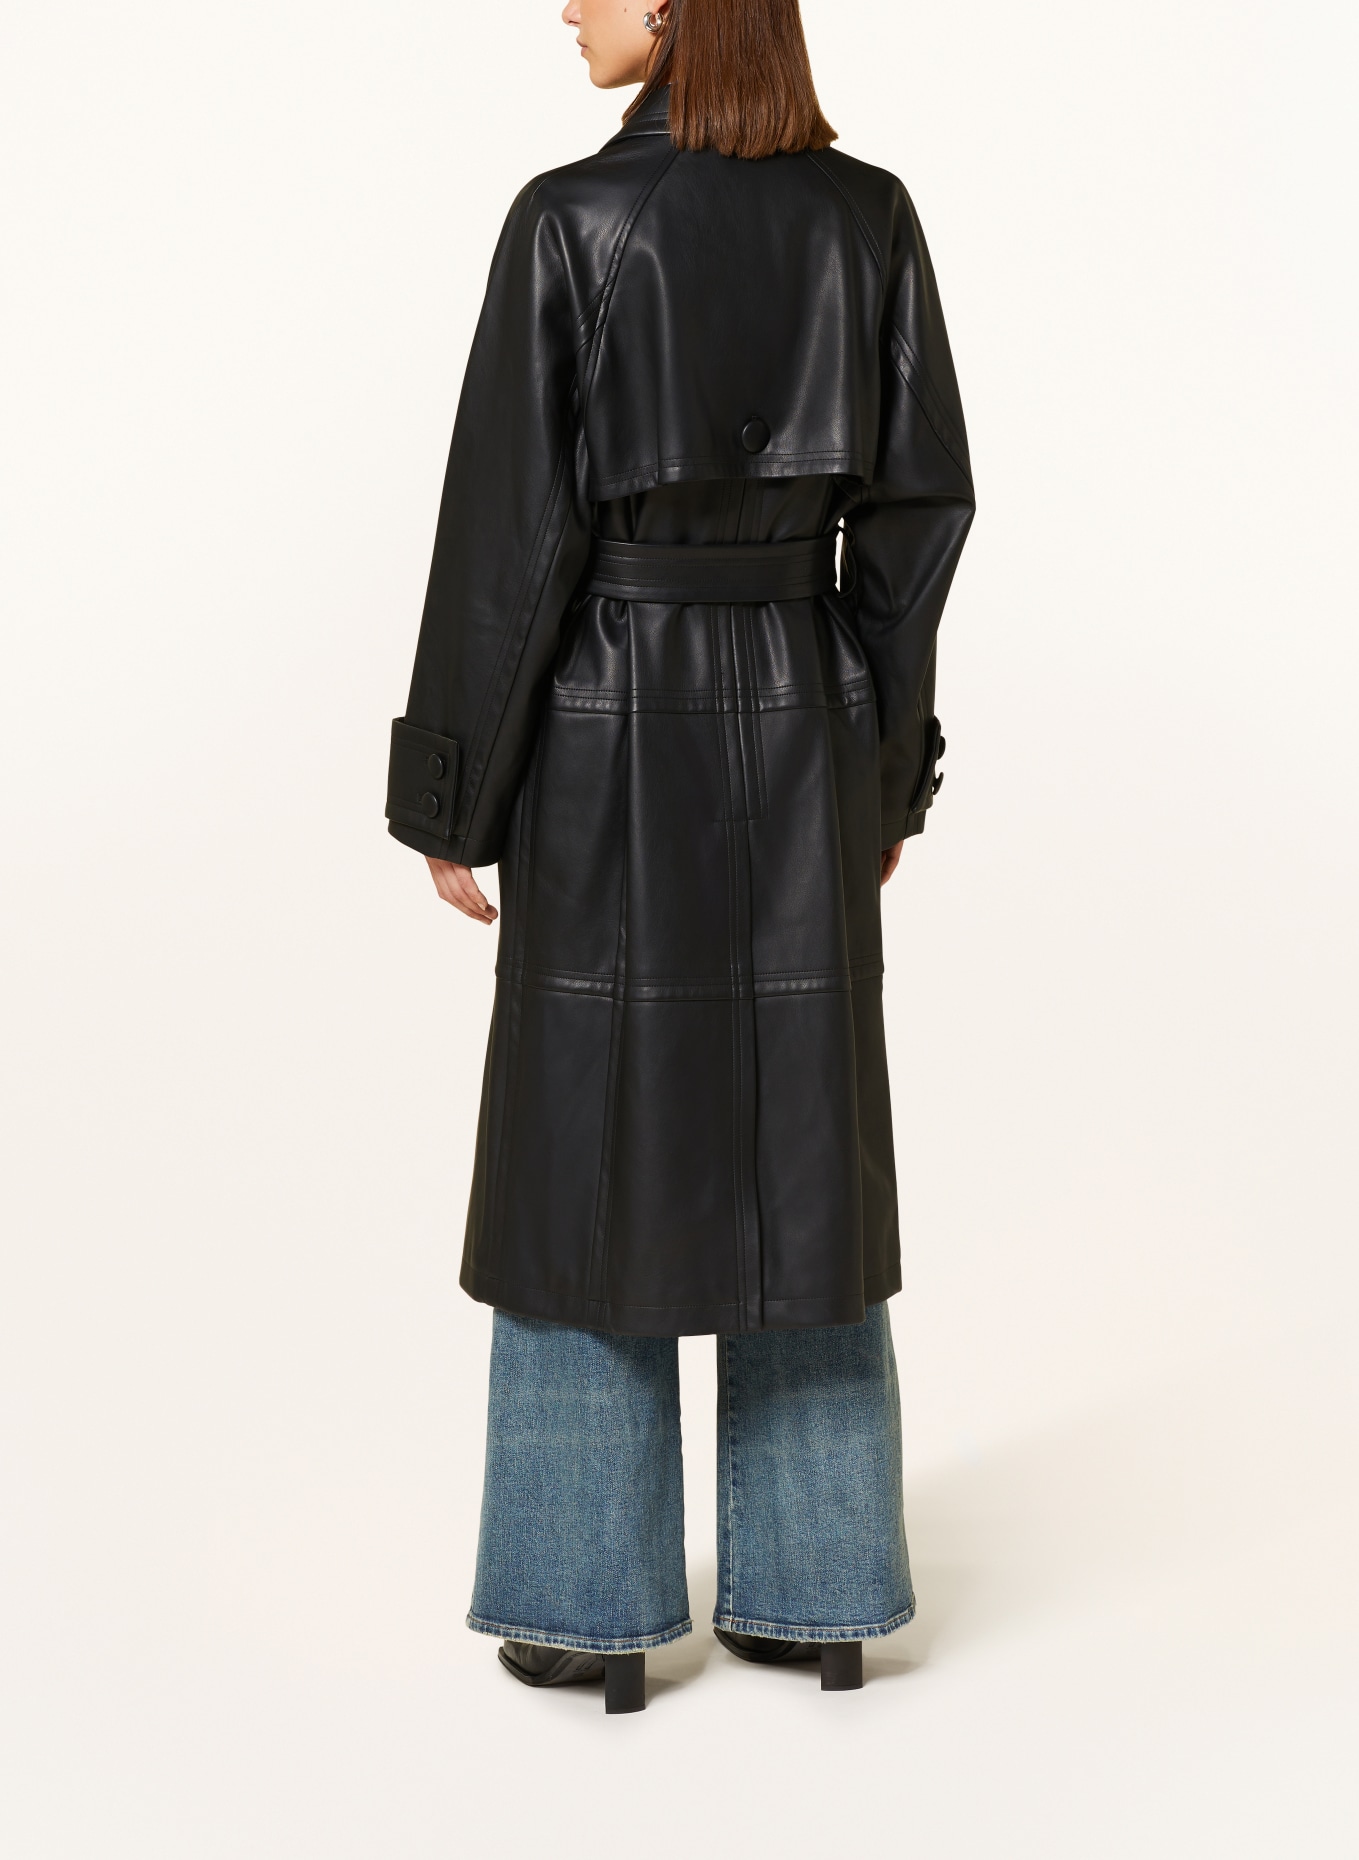 STAND STUDIO Trench coat BETTY made of leather, Color: BLACK (Image 3)